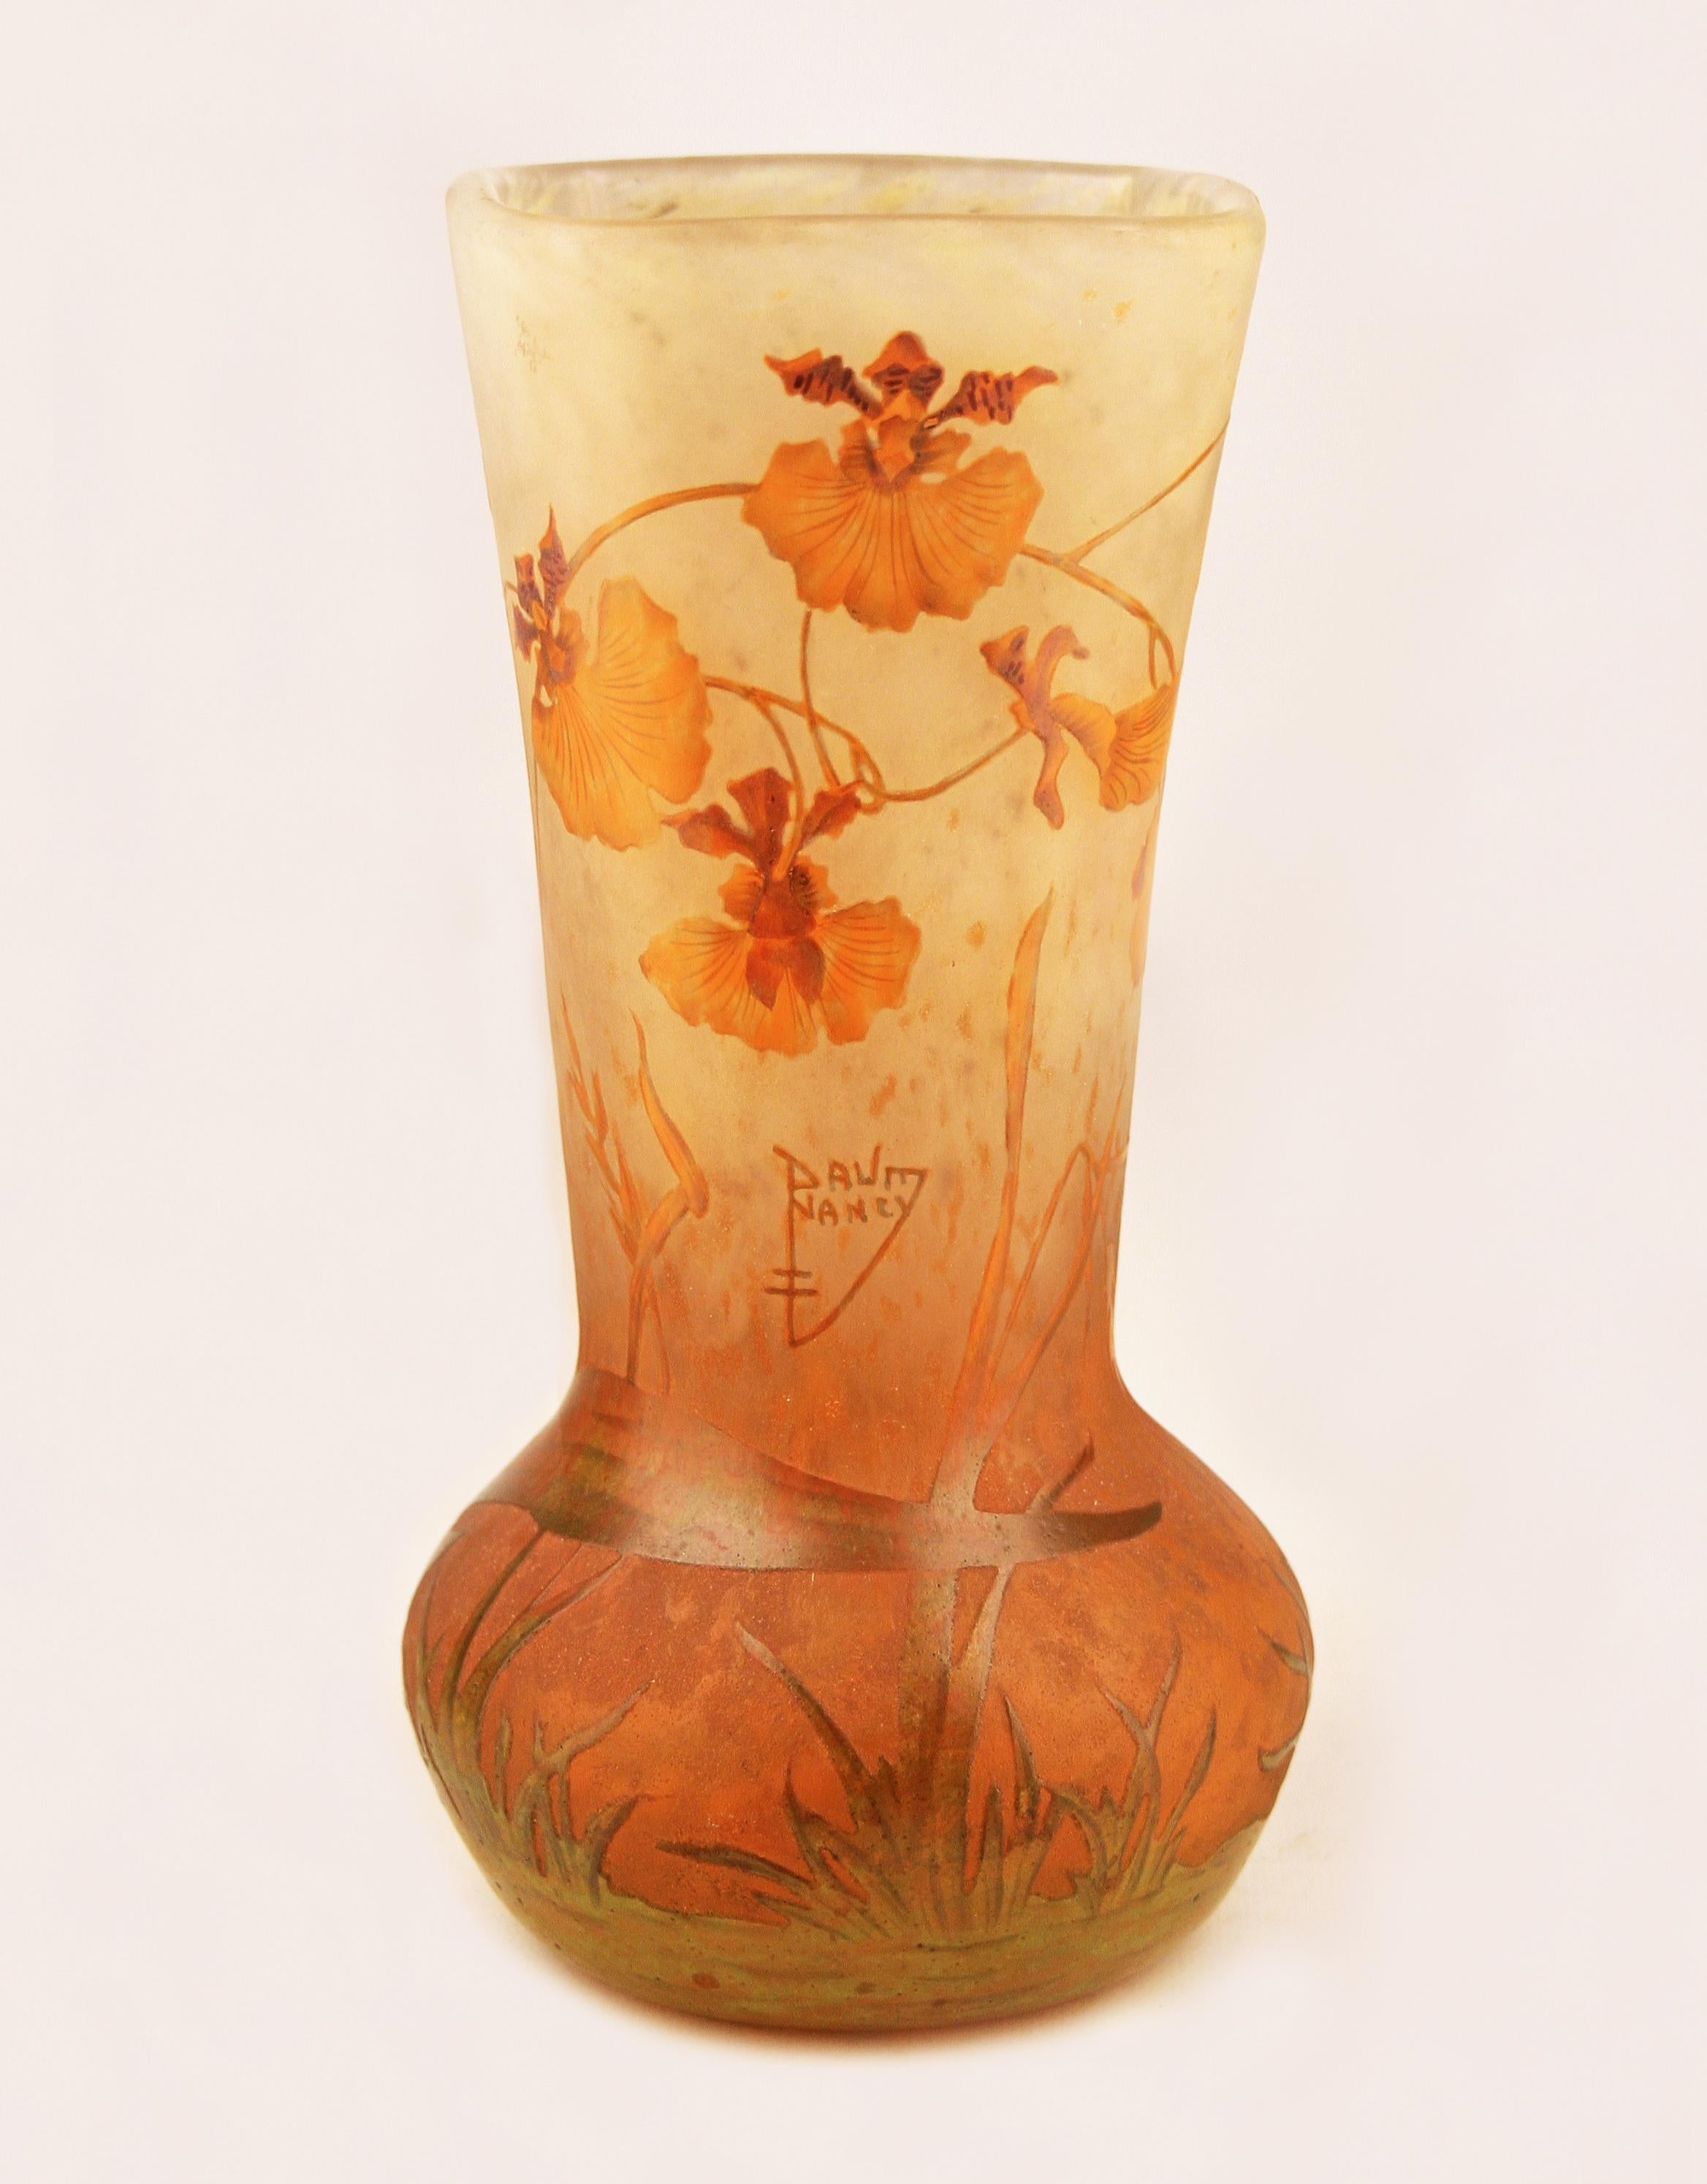 Daum nancy enamel art nouveau
art nouveau style
motif: orchid flowers
green and orange colors
glass vase with flowers and leaves around
Signed with the cross of Lorraine
enamelled and acid-carved technique
Circa 1915 Origin France
Excellent